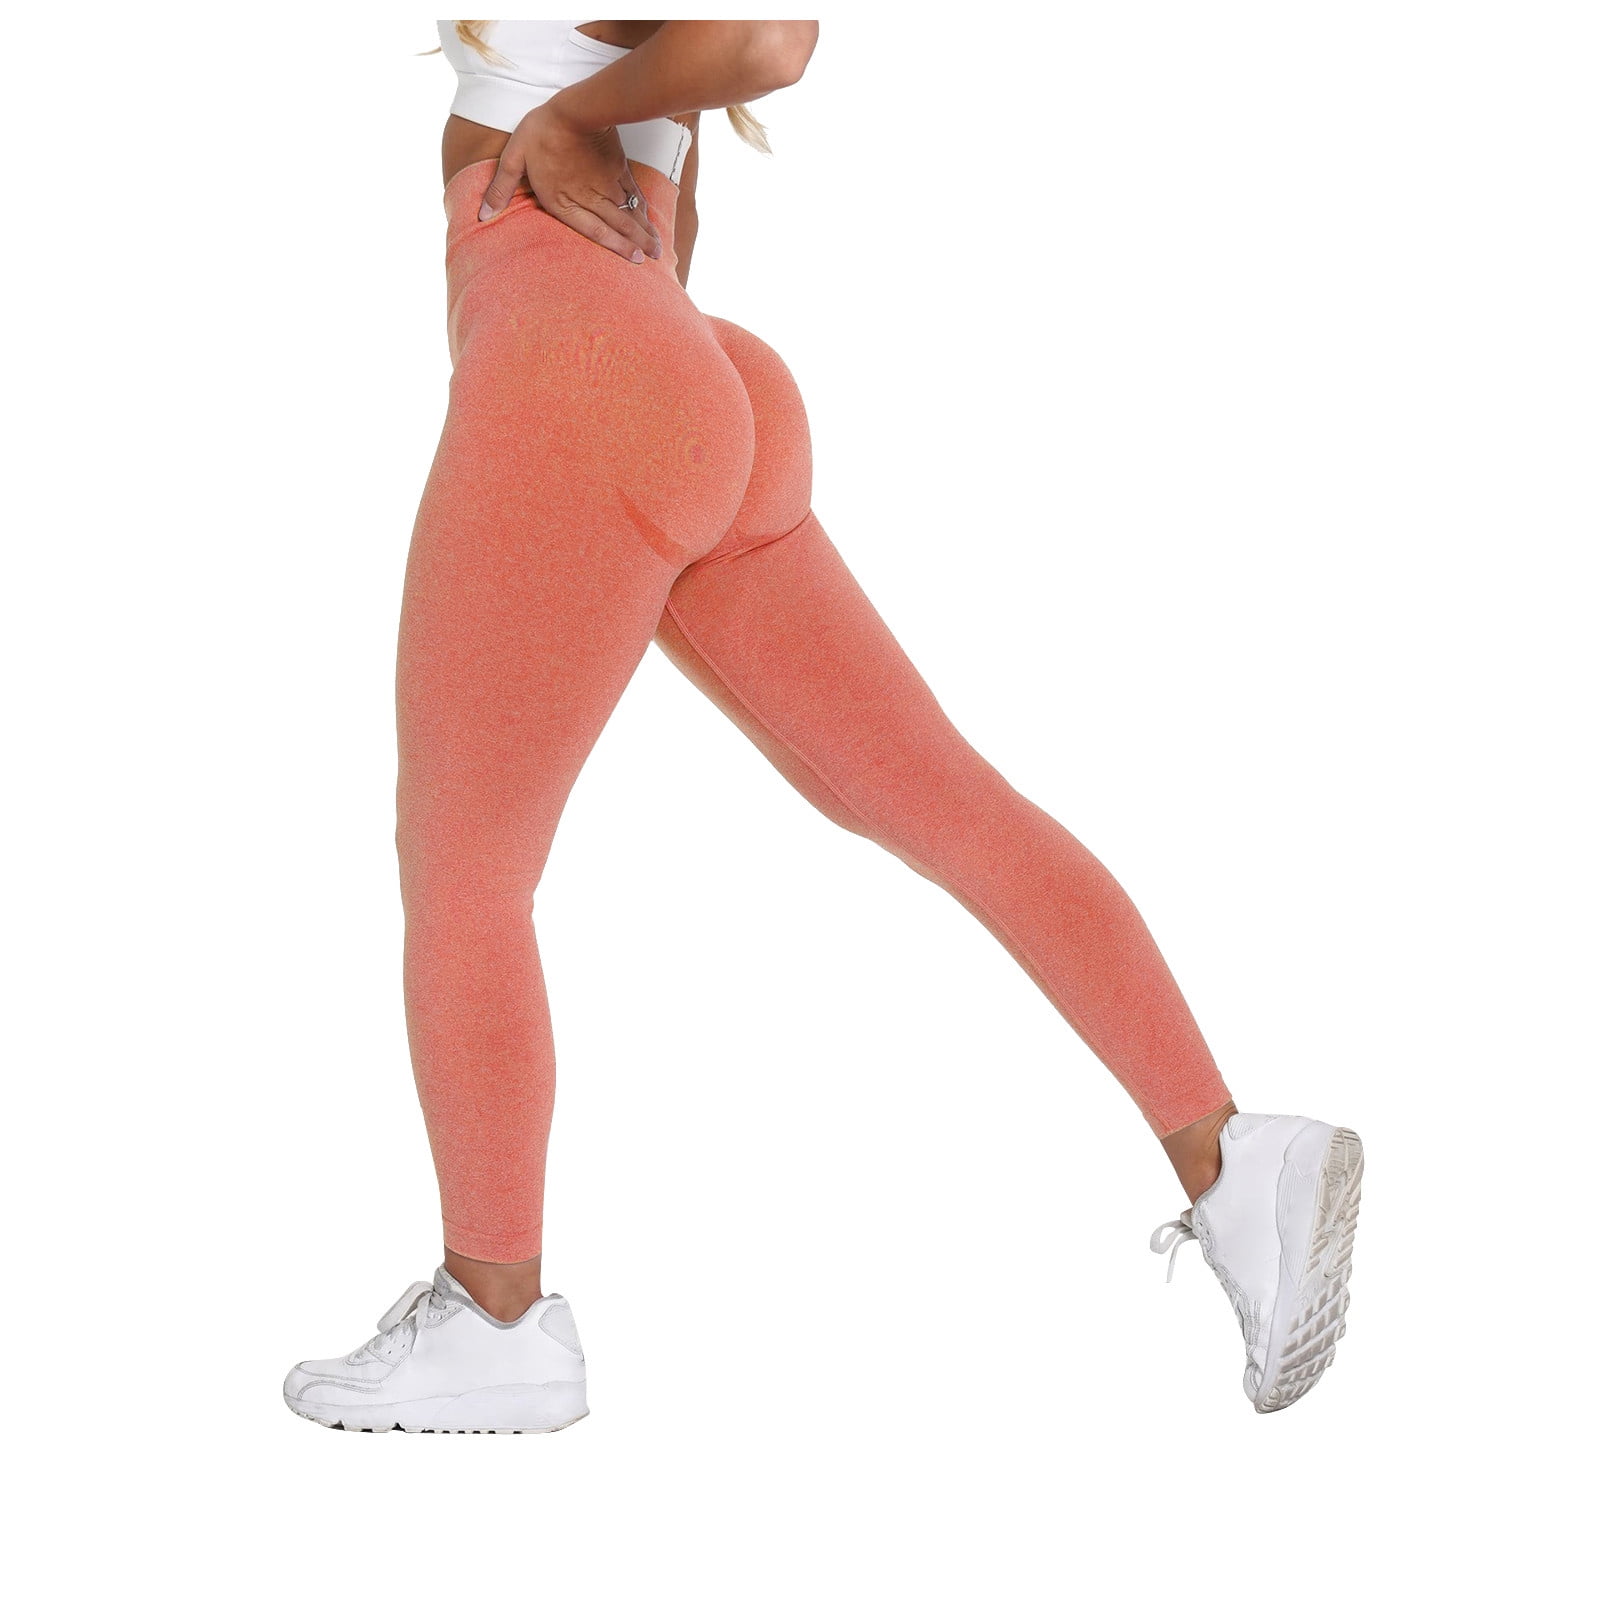 SELONE Tights for Women Workout Butt Lifting Gym Long Length